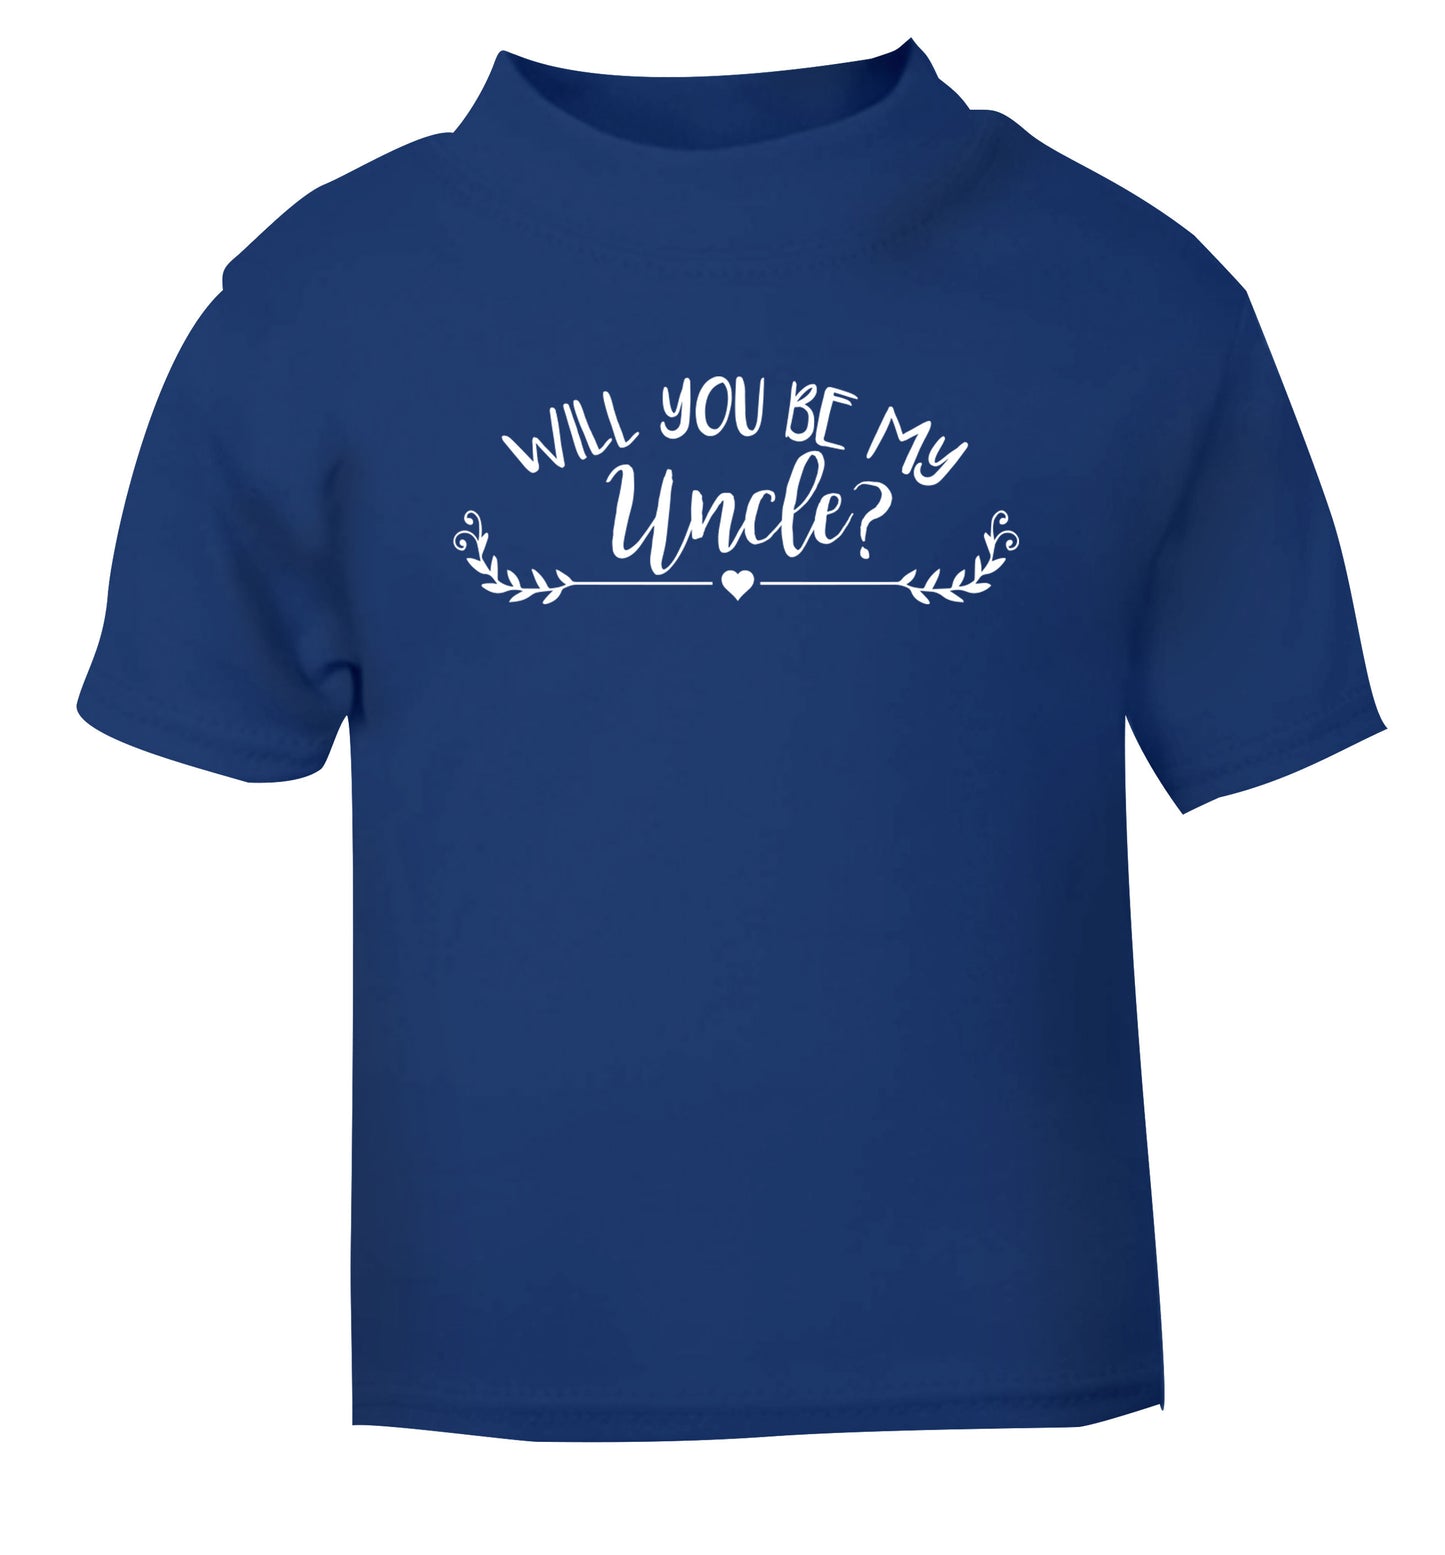 Will you be my uncle? blue Baby Toddler Tshirt 2 Years